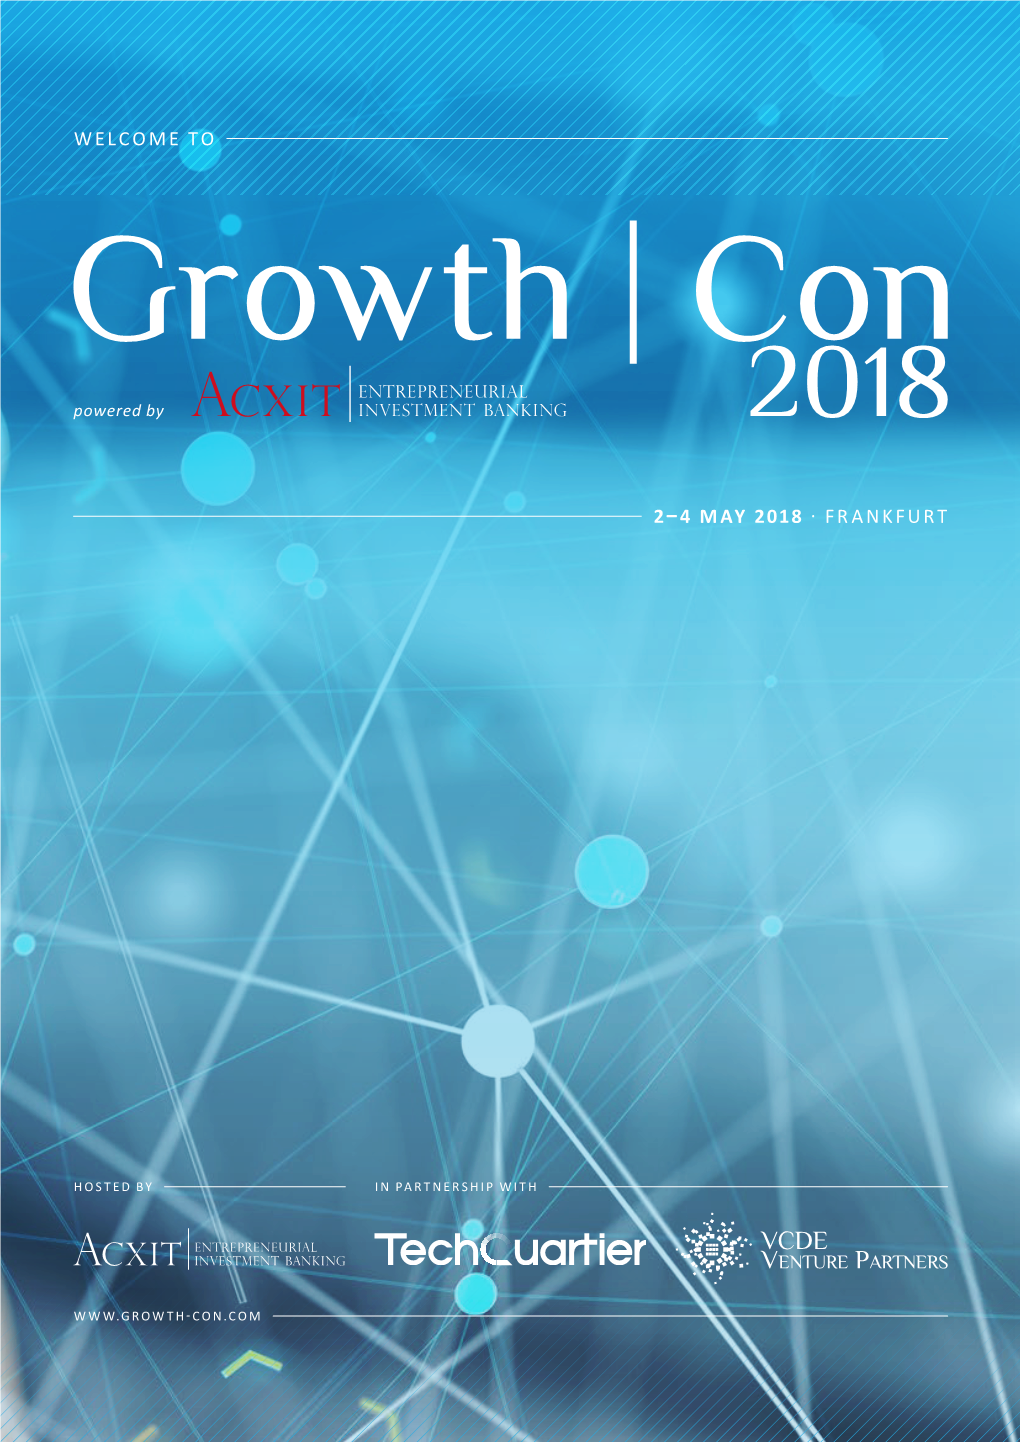 Conference Brochure of 2018